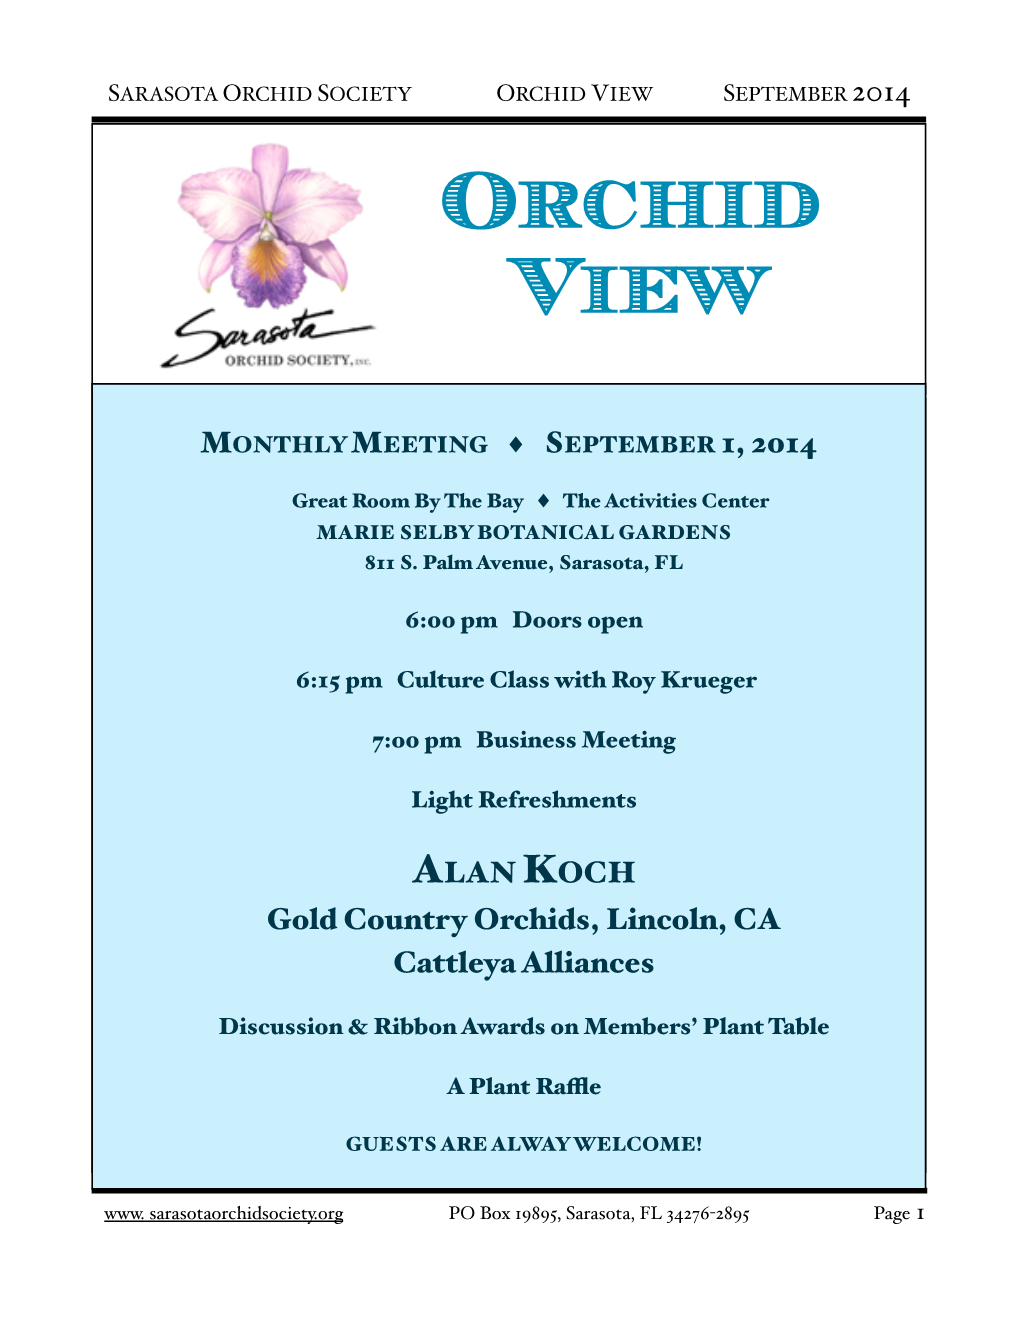 SOS Orchid View Sept 2014